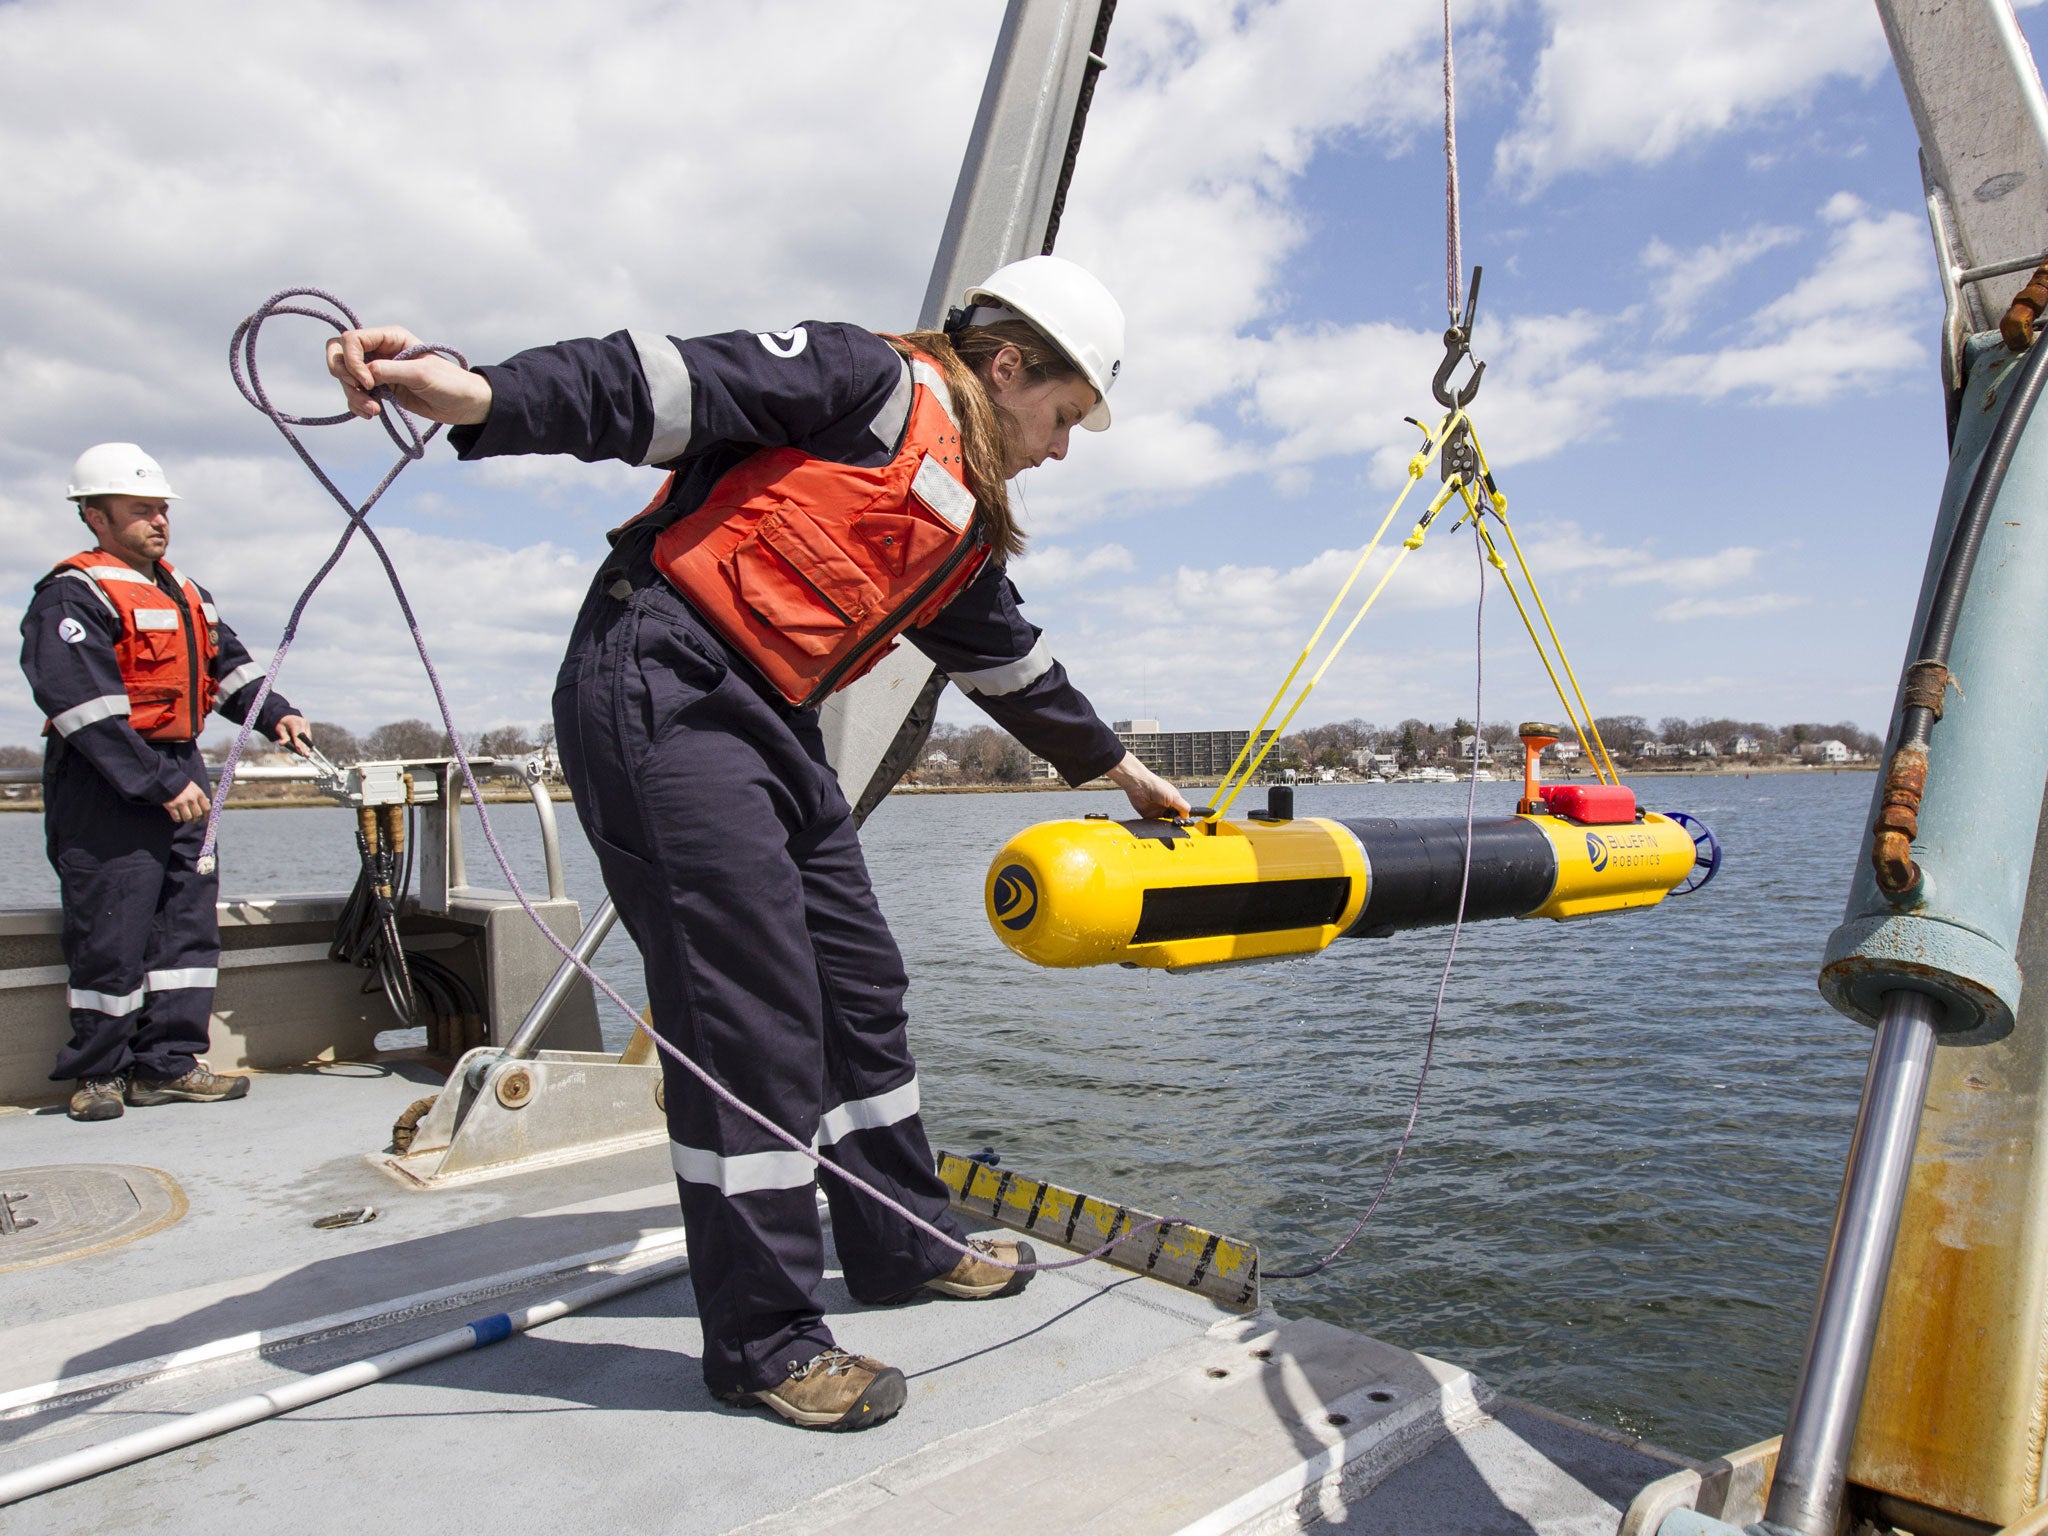 A submarine built by Bluefin Robotics is lowered into the water by systems engineer Cheryl Mierzwa in Quincy to help locate the missing Malaysian Airlines Flight 370